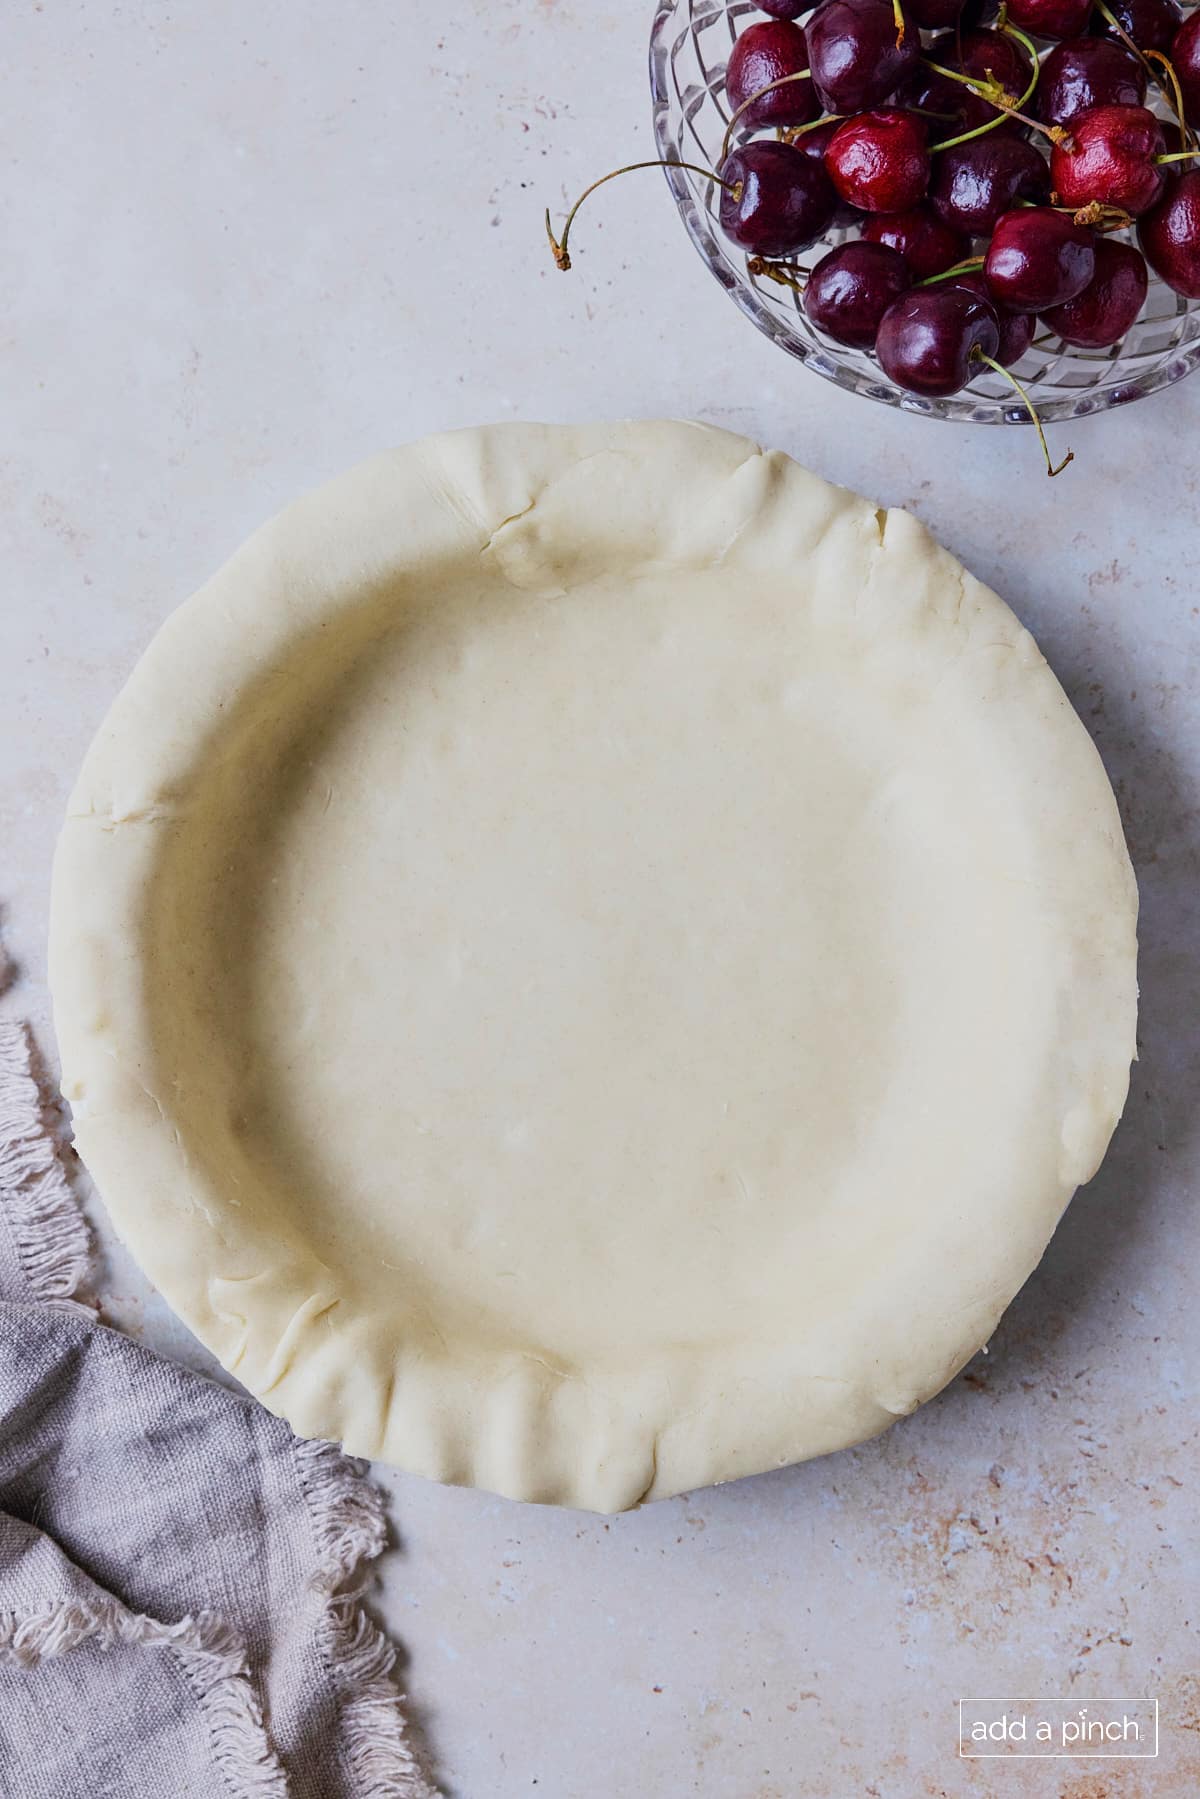 Pie crust in a pie plate ready for filling.